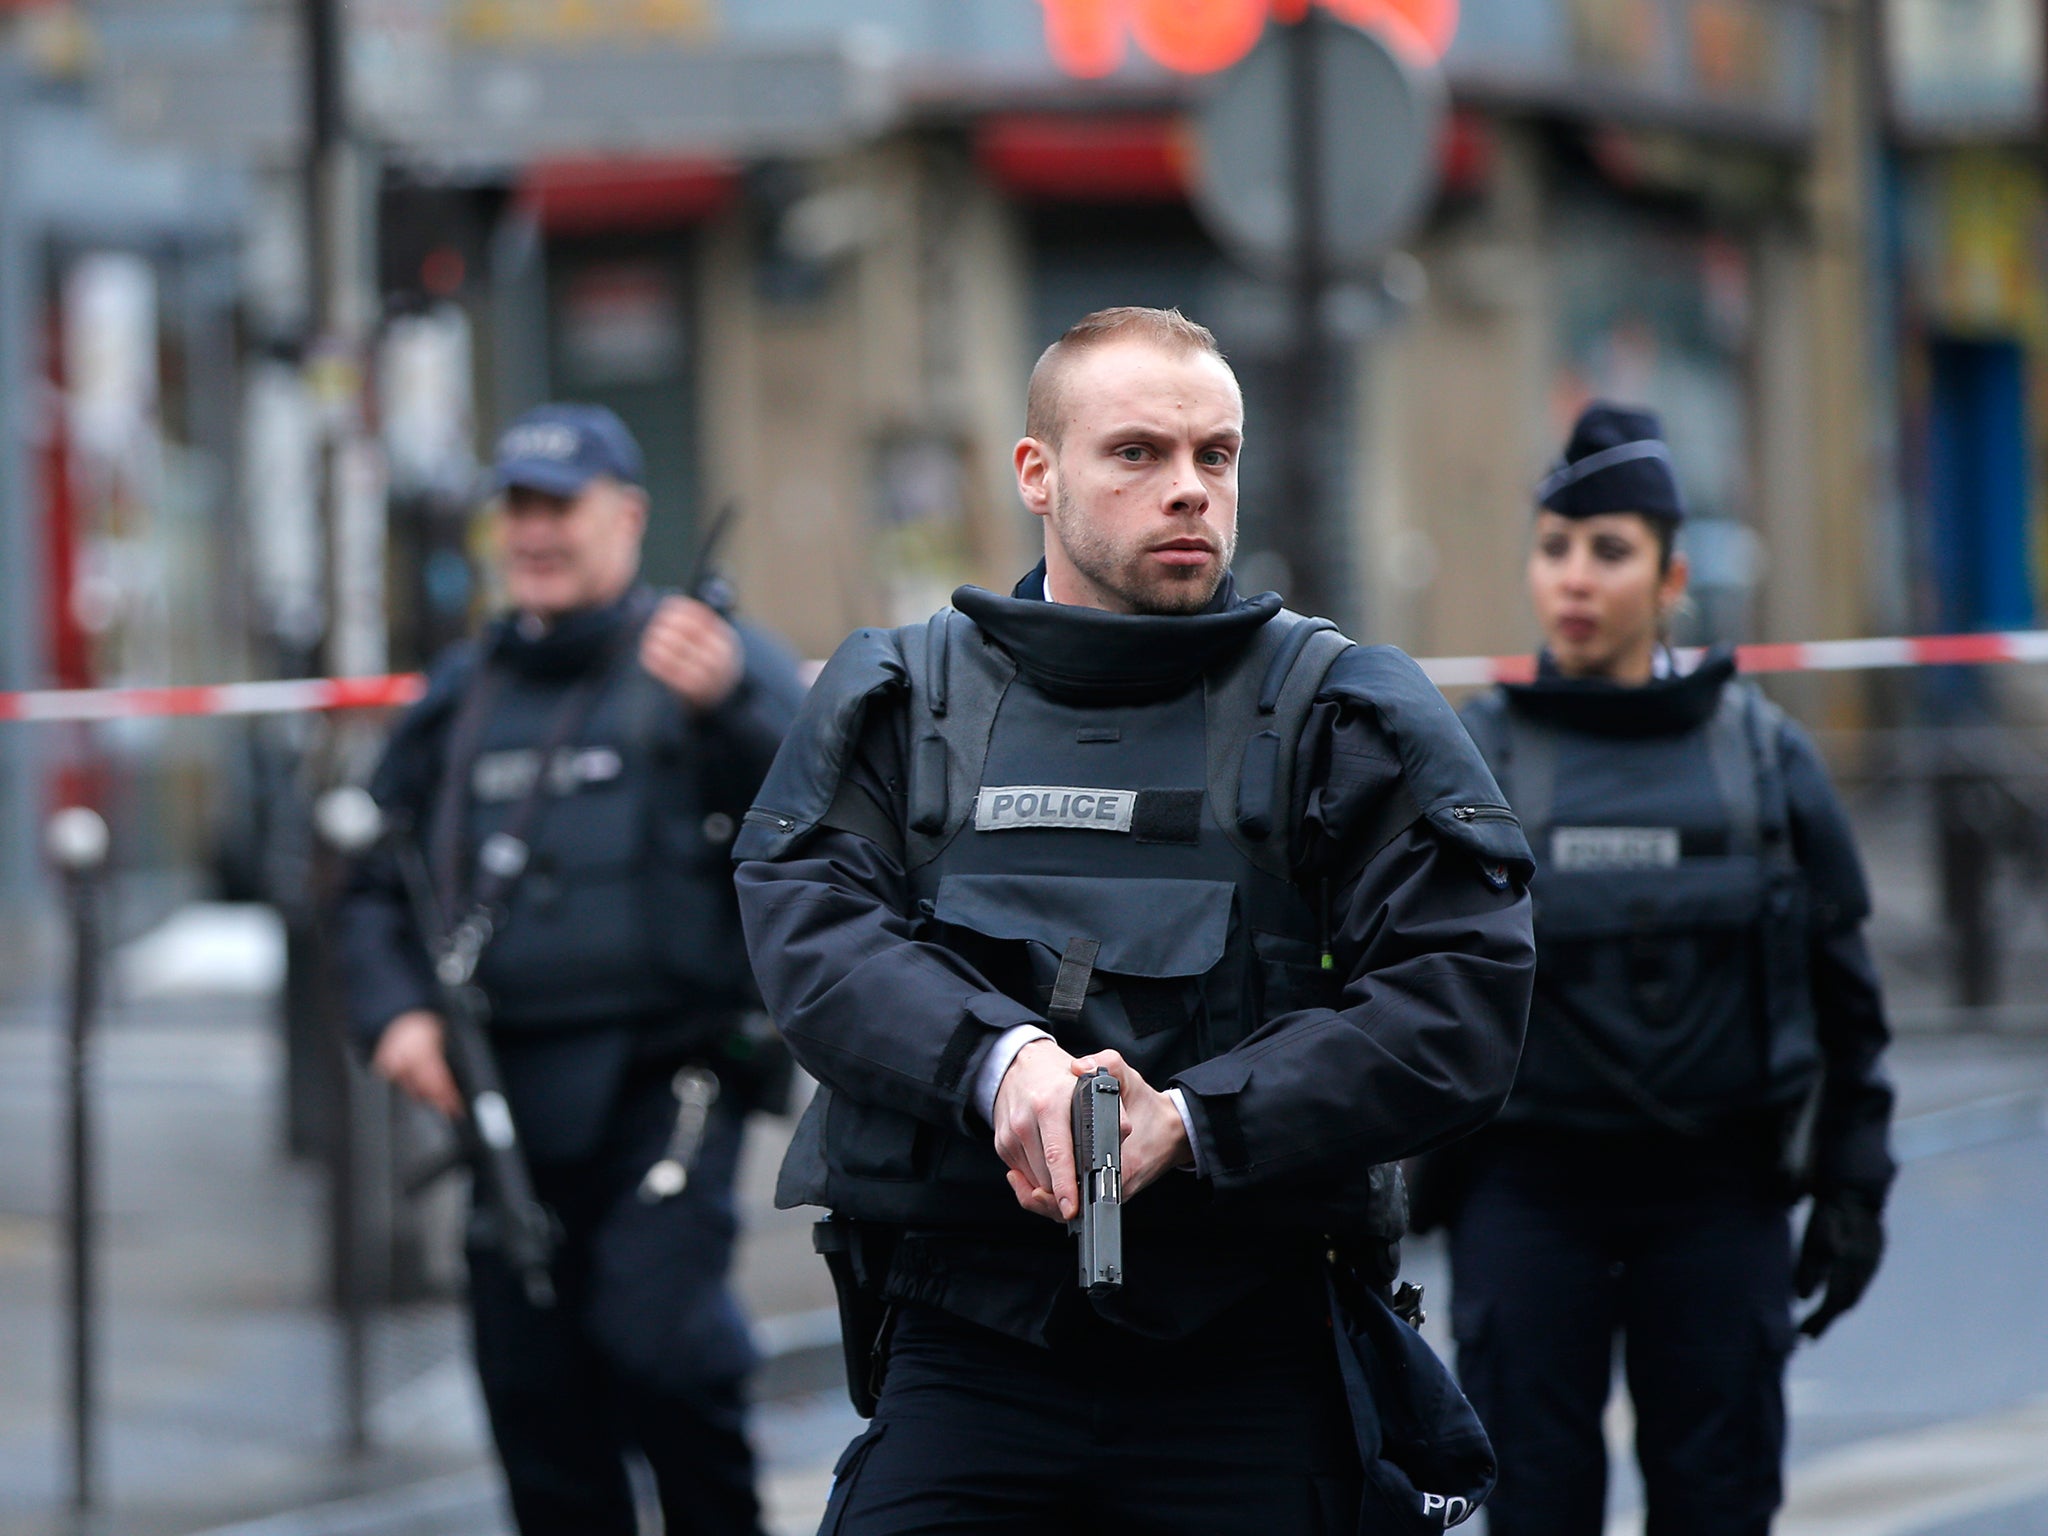 Police officers secure the perimeter near the scene of a fatal shooting which took place at a police station in Paris